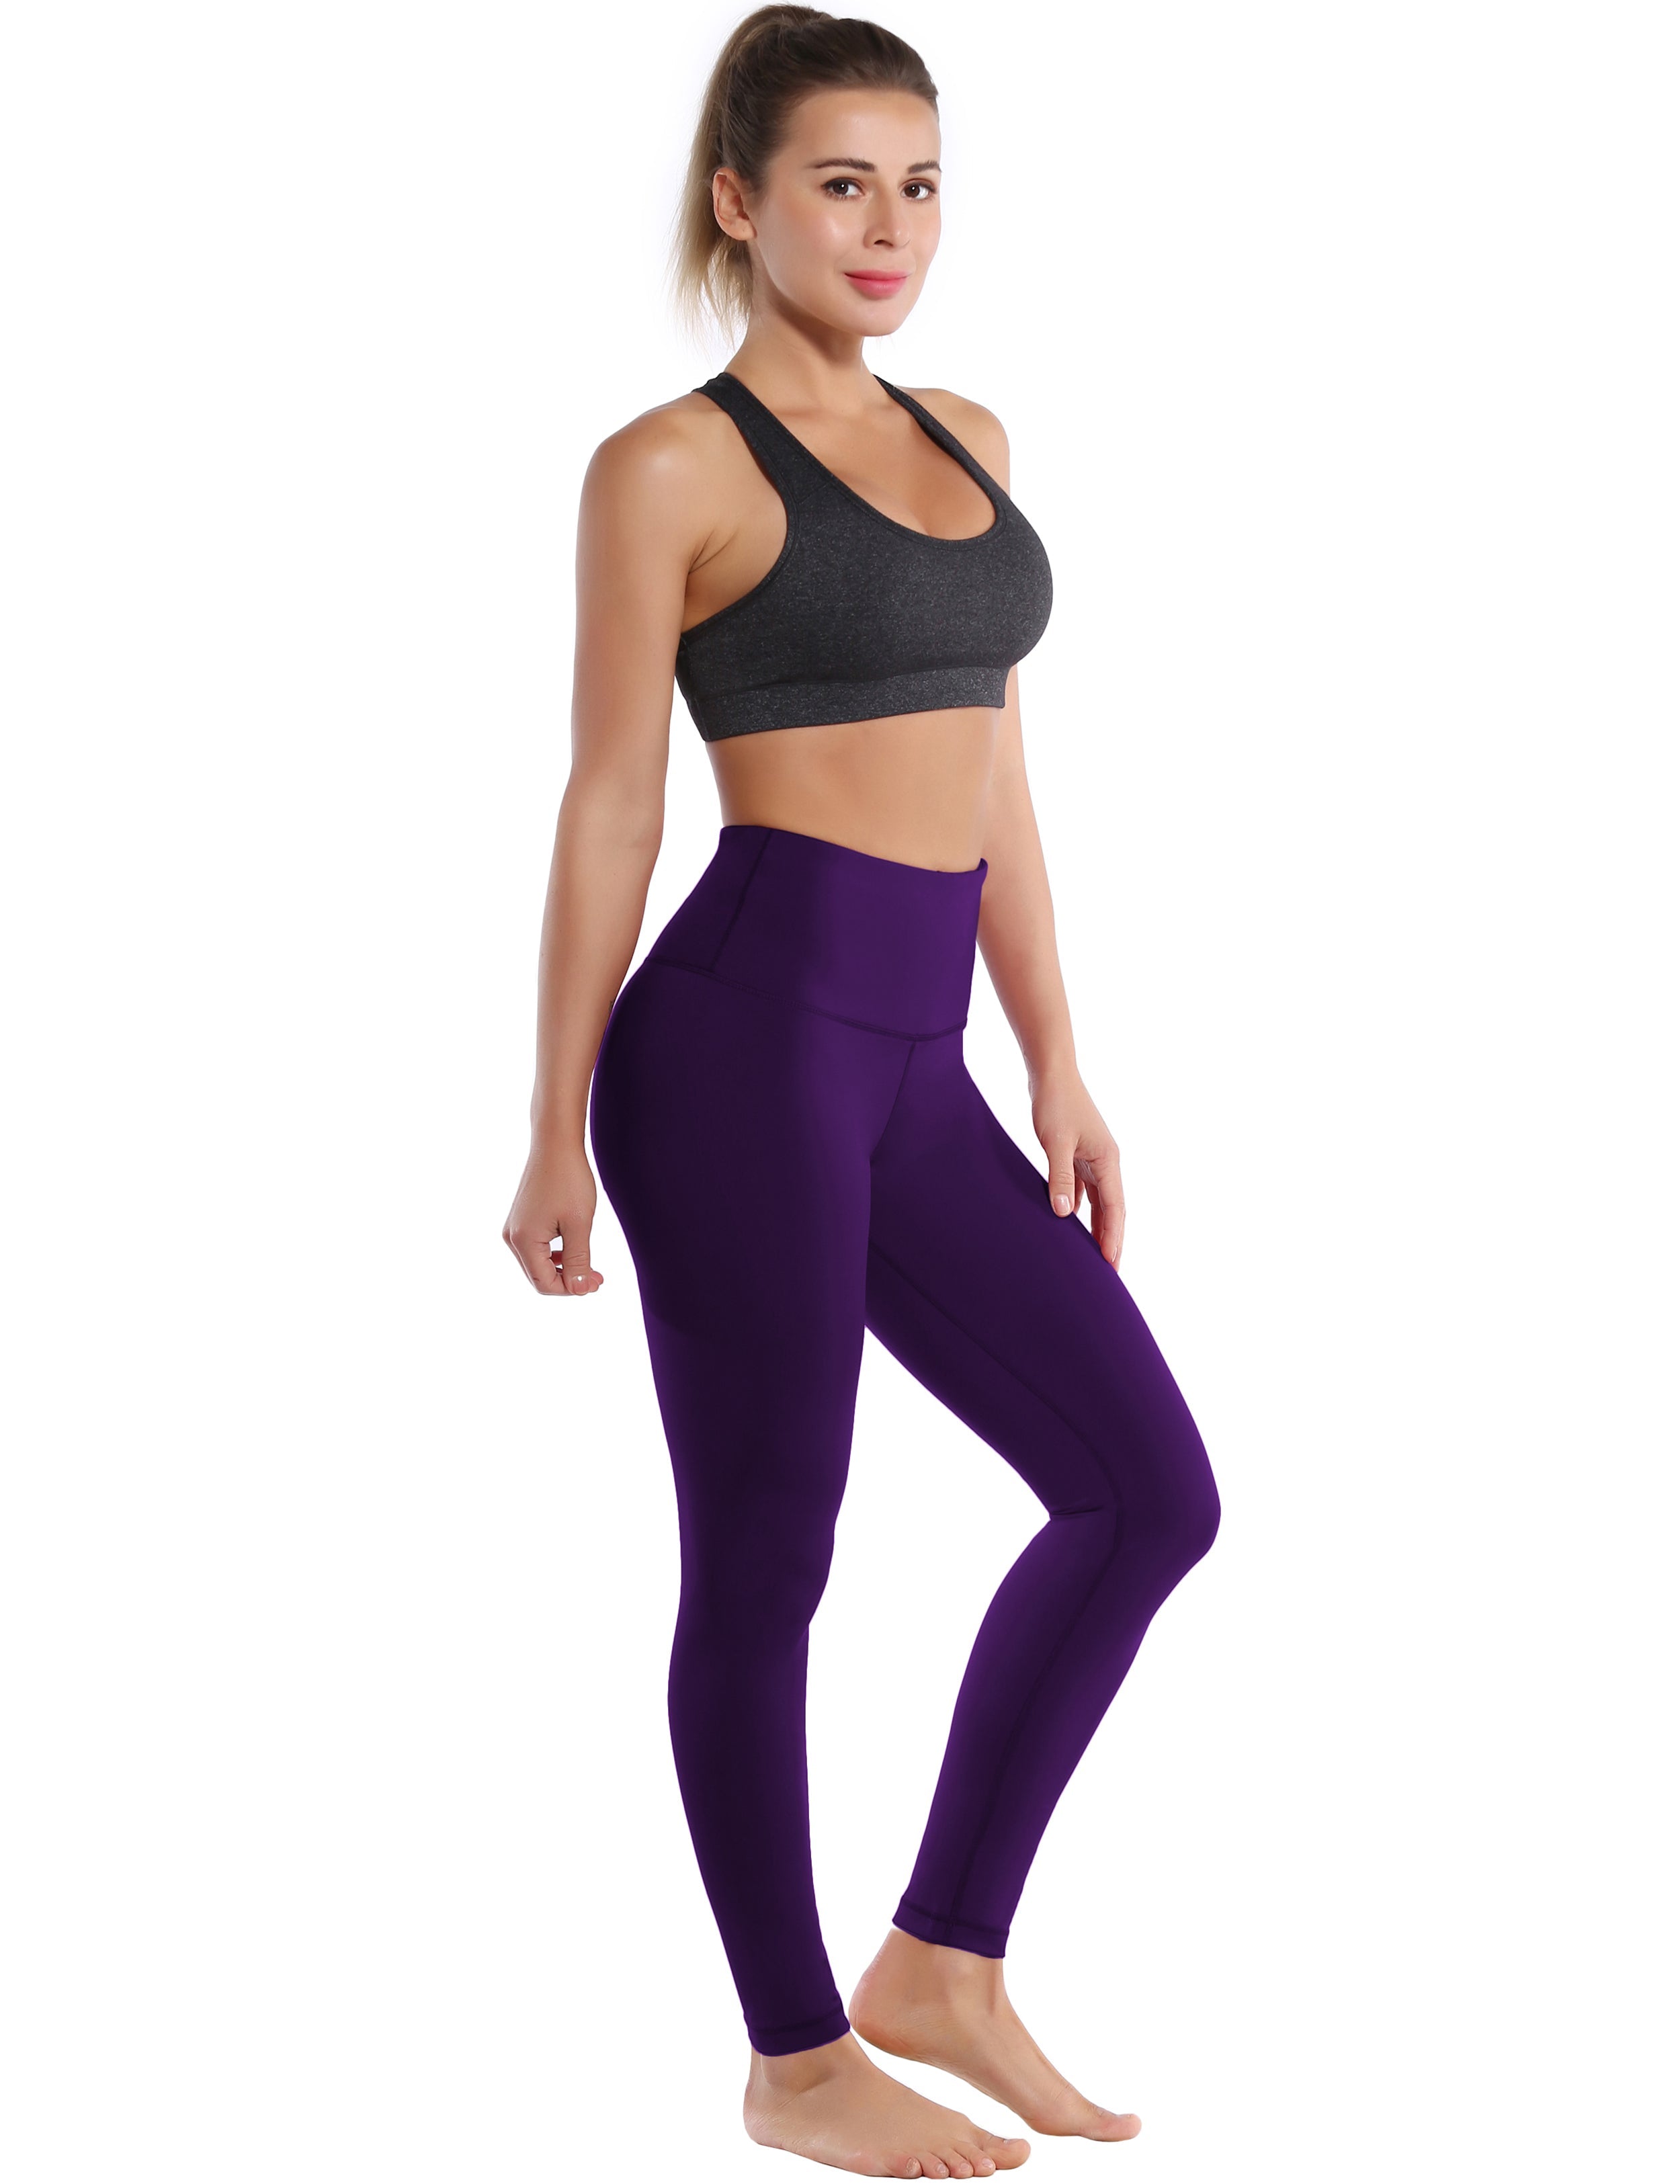 High Waist Gym Pants eggplantpurple 75%Nylon/25%Spandex Fabric doesn't attract lint easily 4-way stretch No see-through Moisture-wicking Tummy control Inner pocket Four lengths